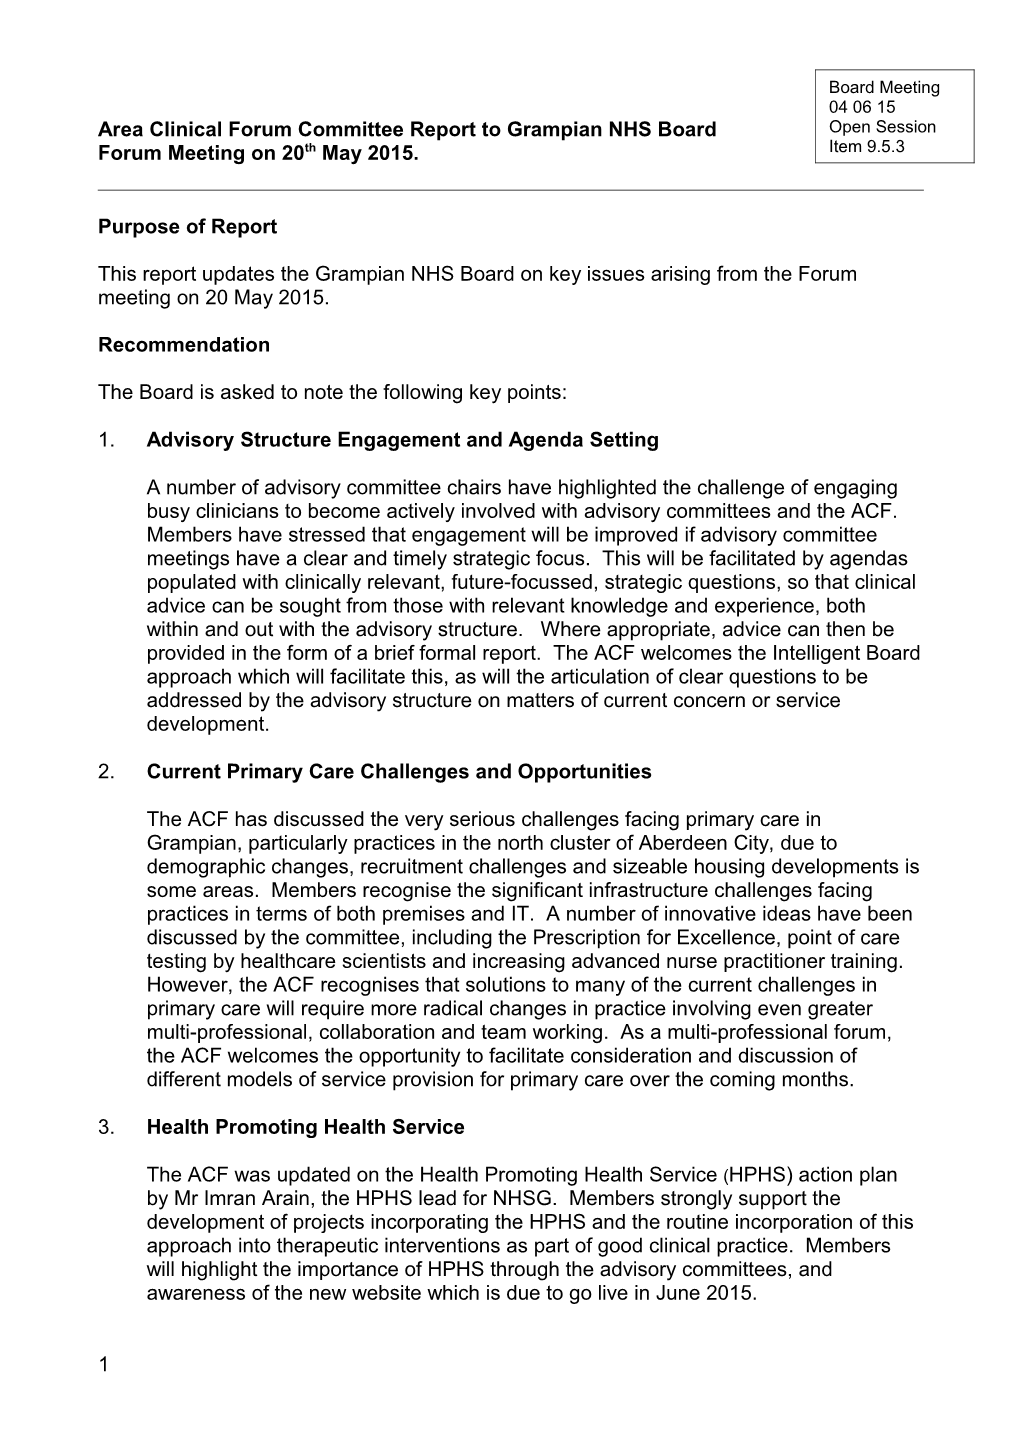 Item 9.5.3 for 4 June 2015 Area Clinical Forum Report